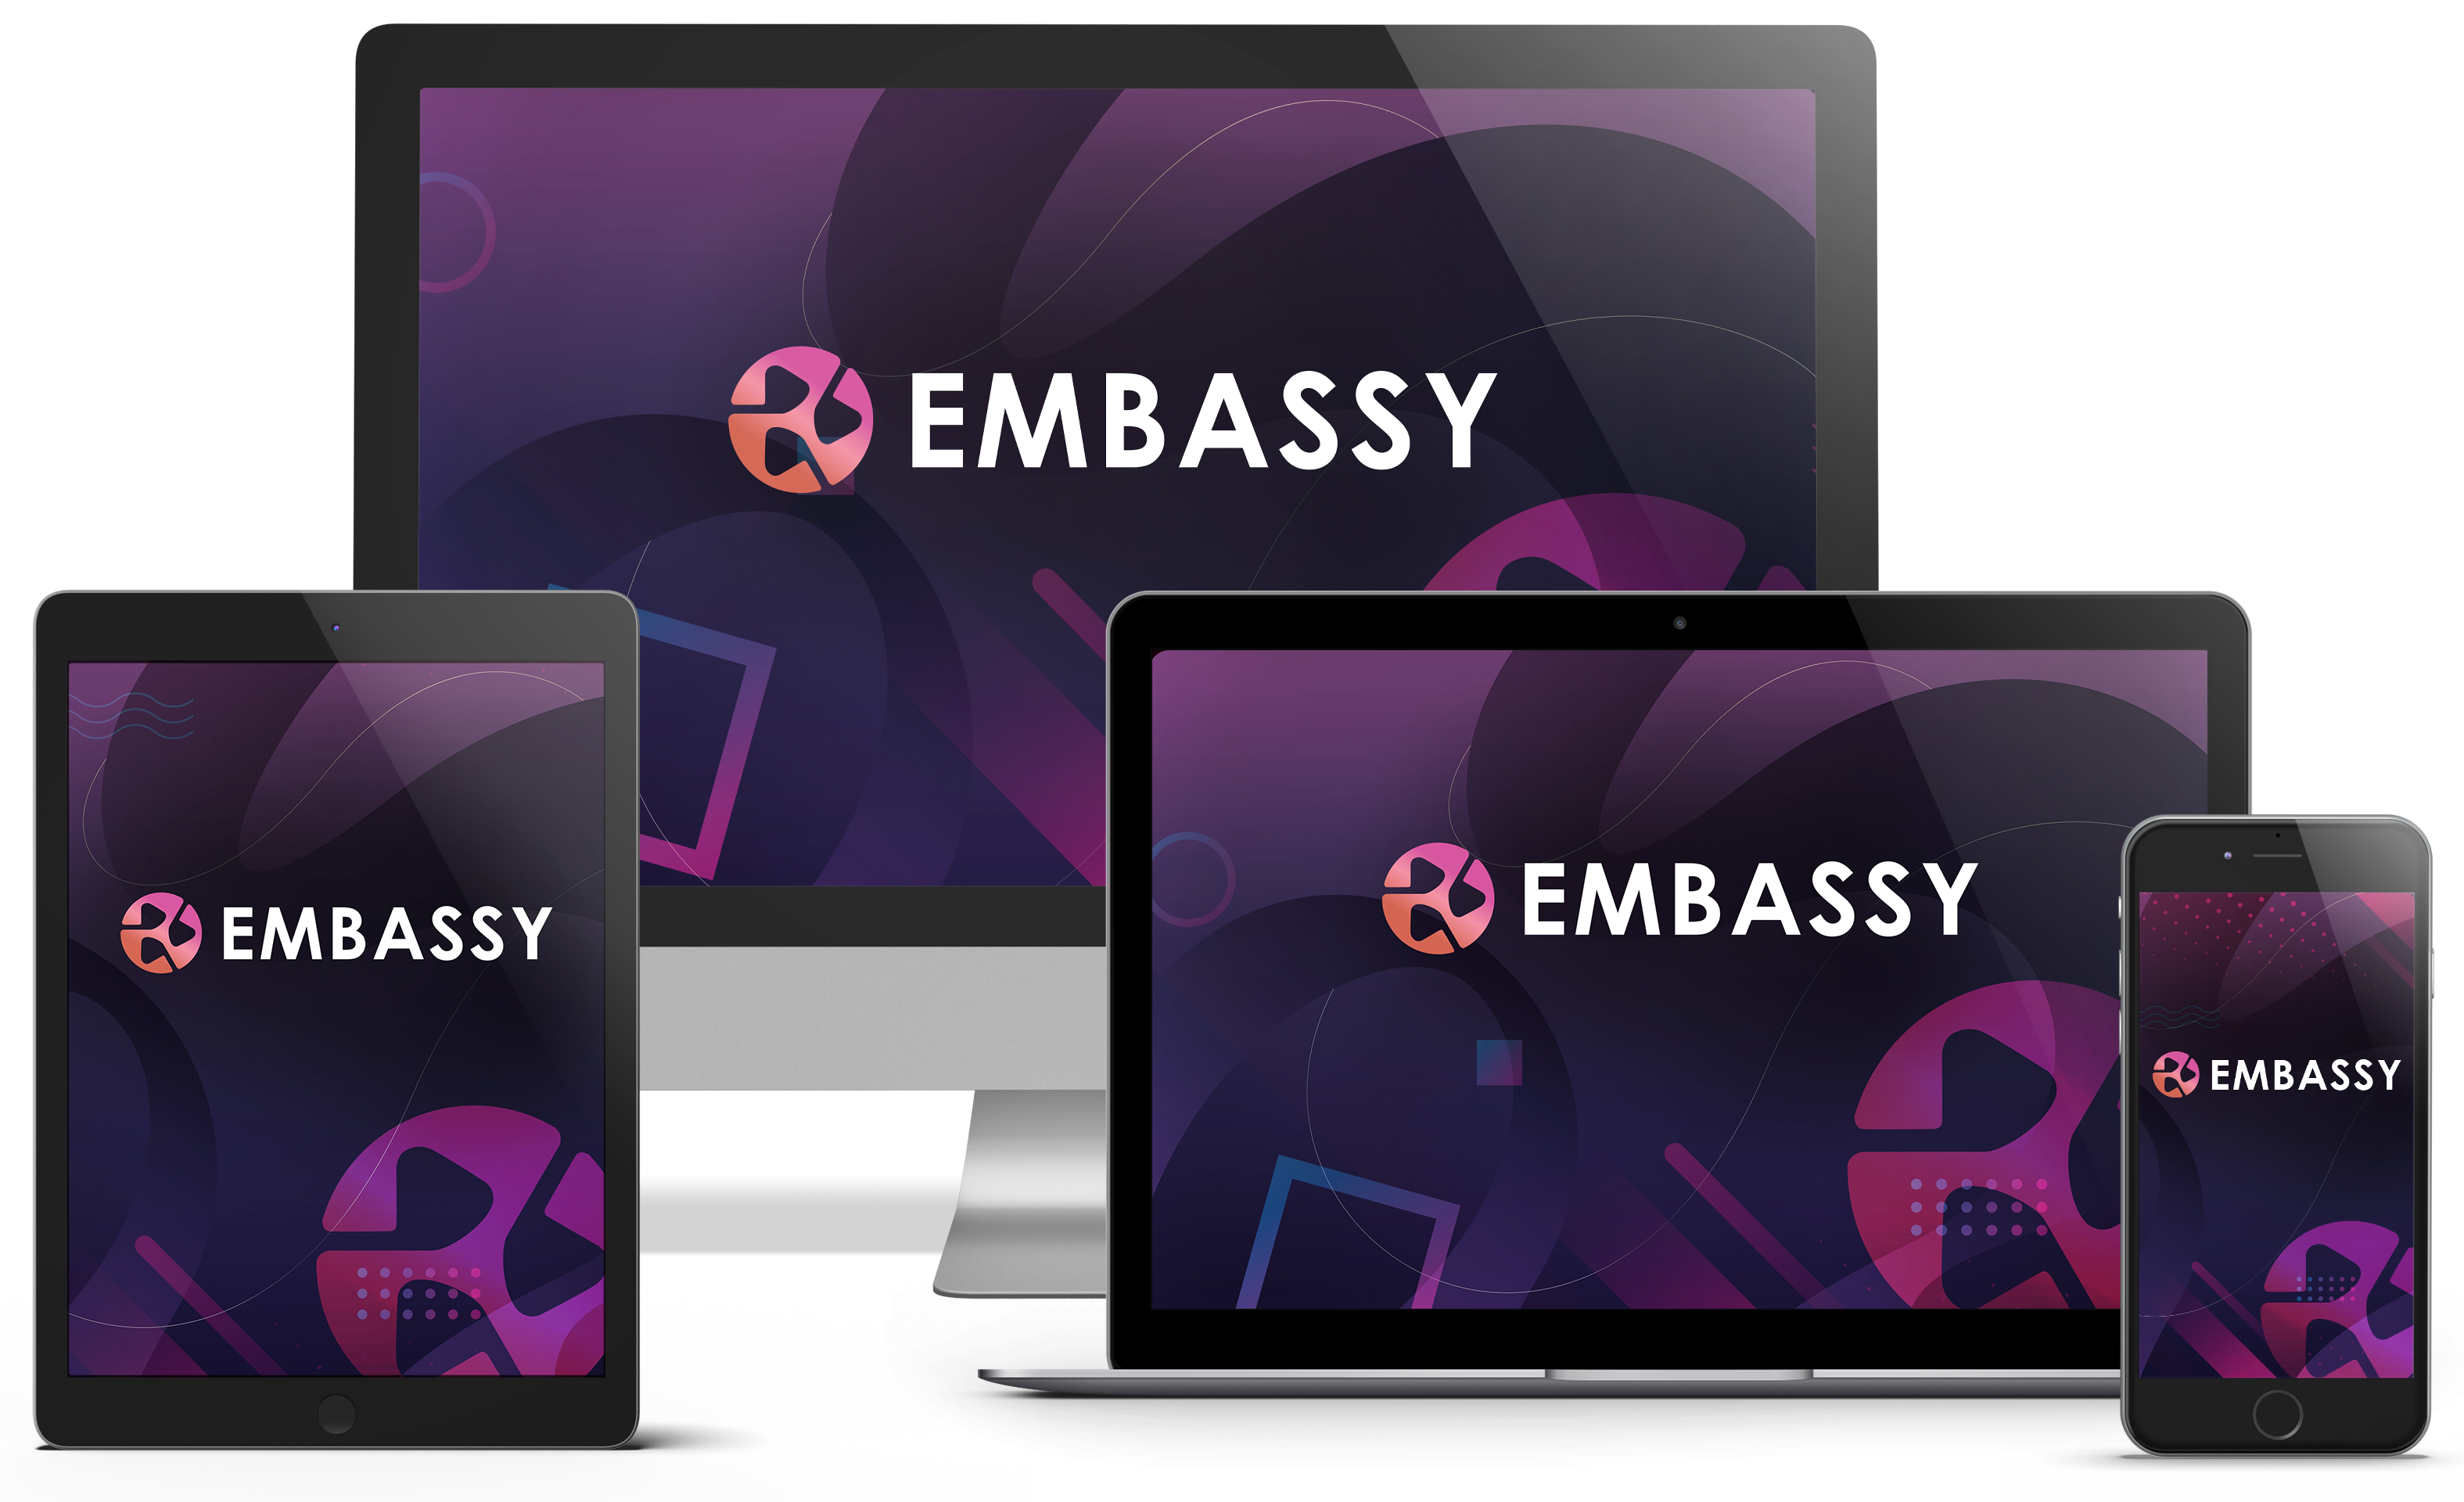 mbassy Traffic system software